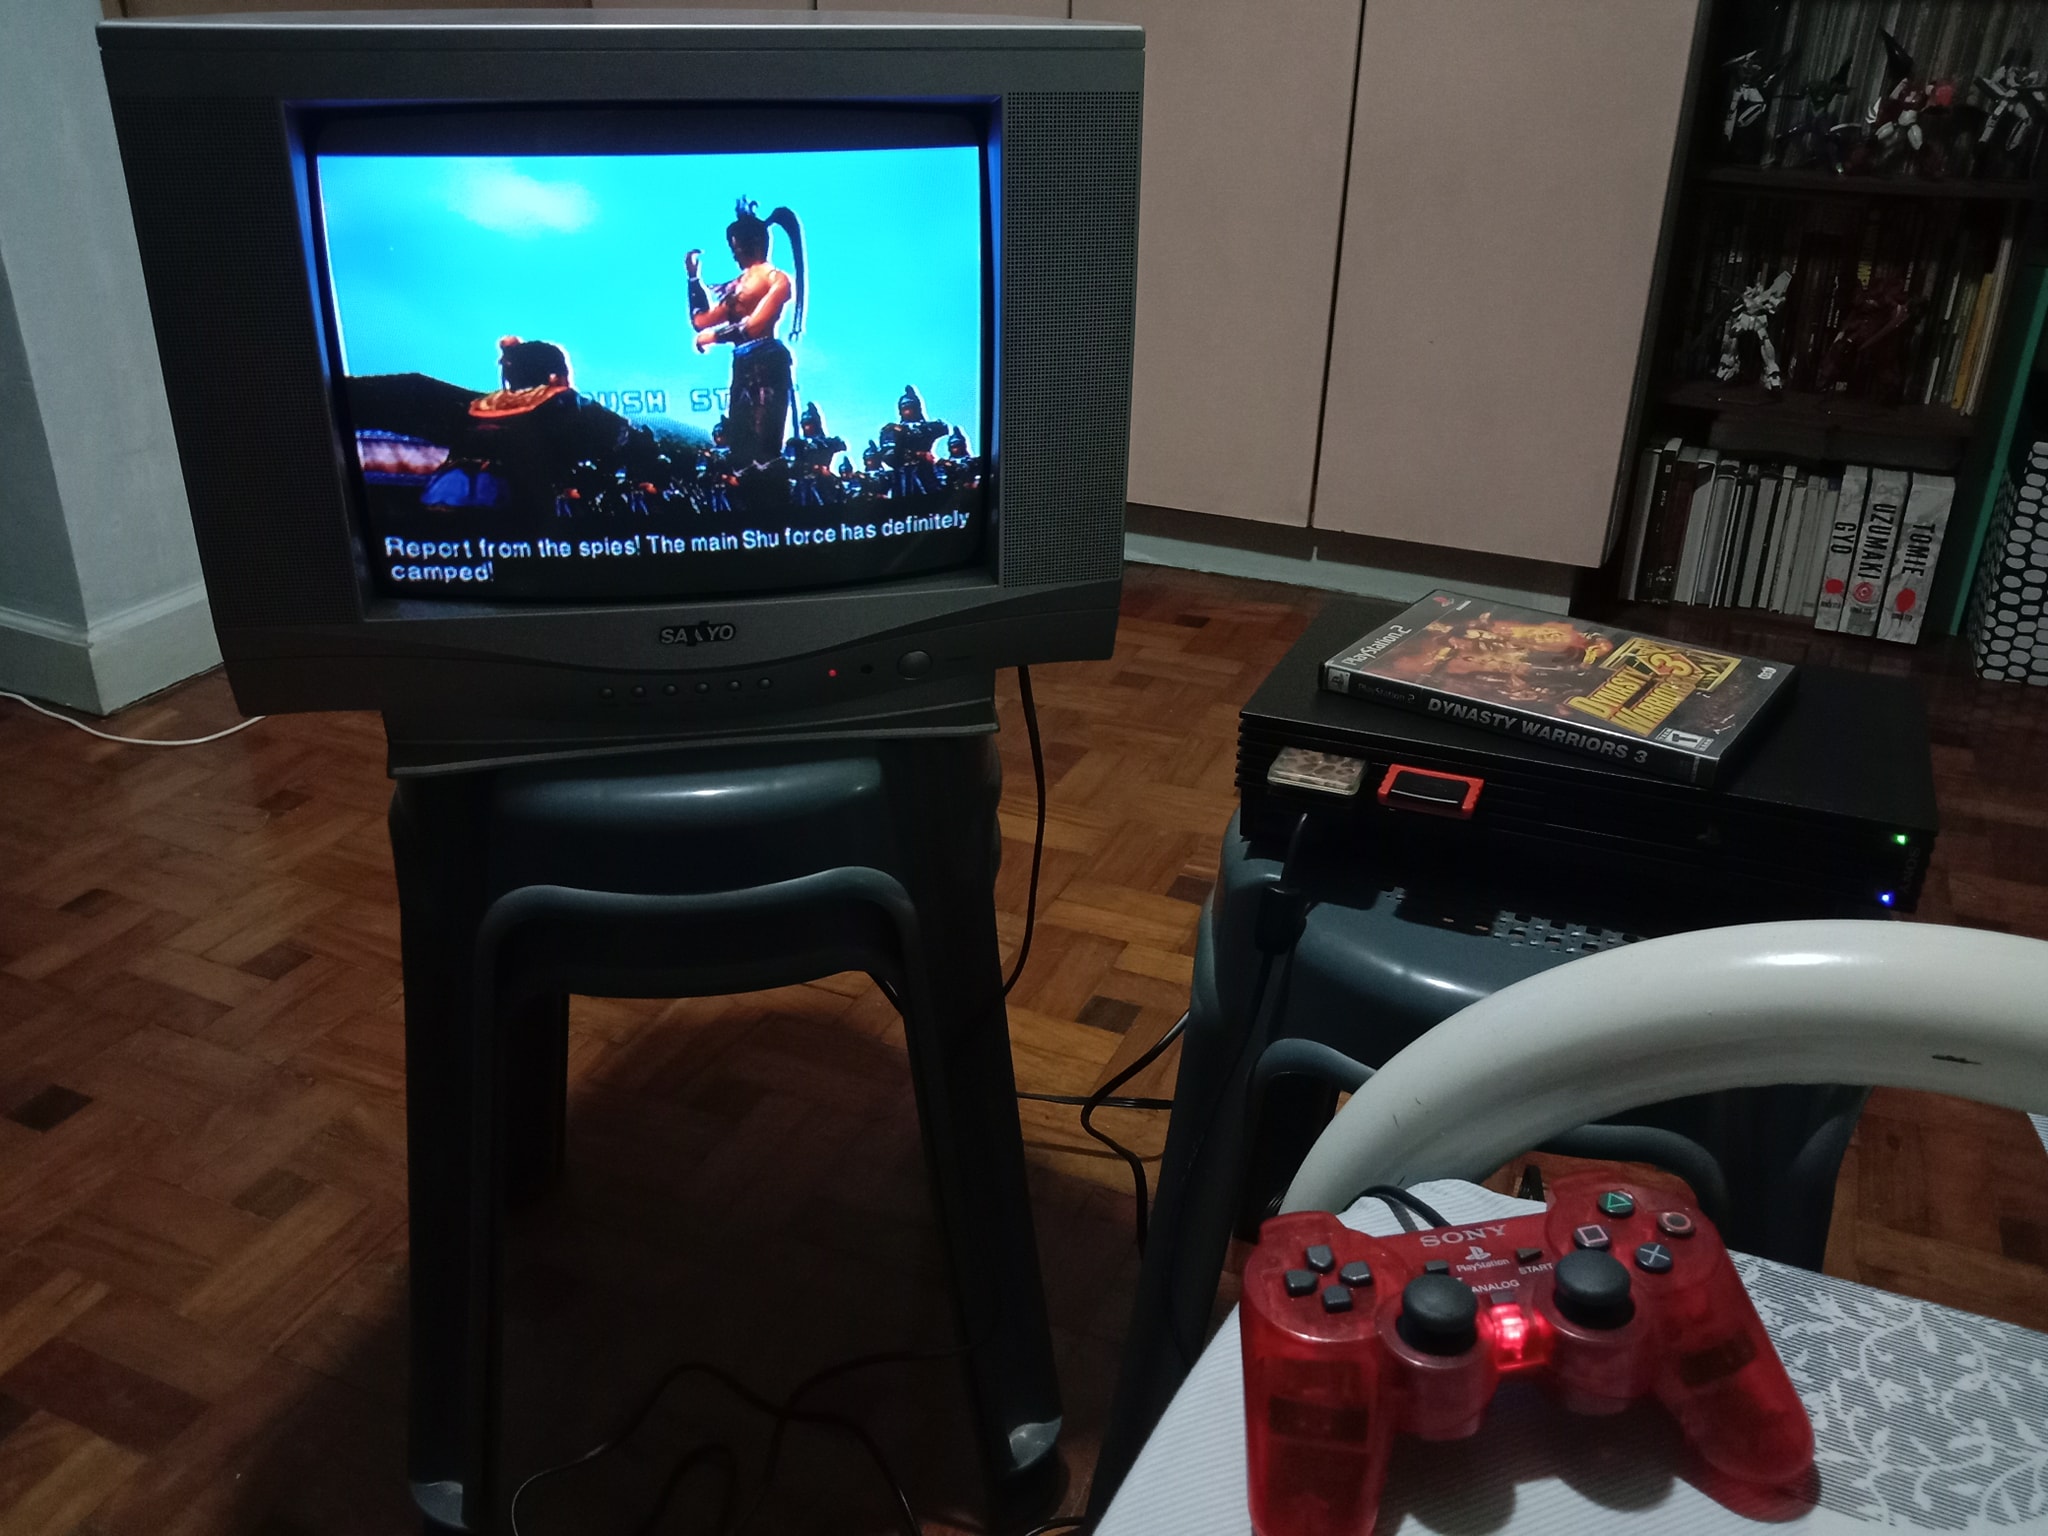 My Sanyo TV set with a PS2 plugged in. Dynasty Warriors 3 FTW!